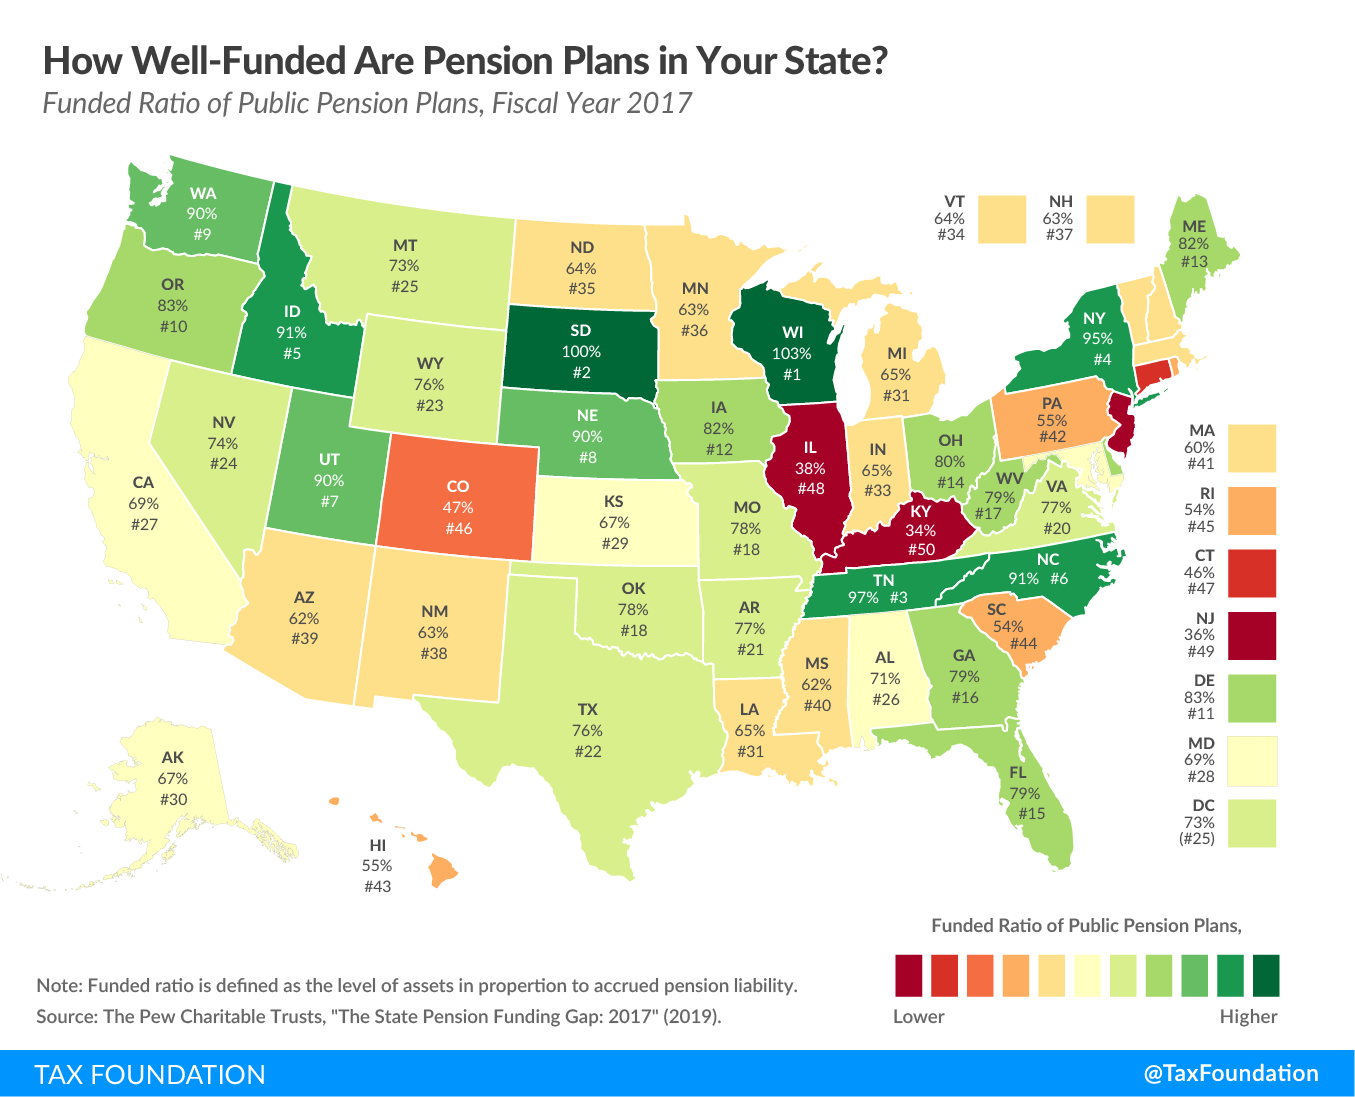 Public Pensions Are About To Make Major Mistakes, But They Don't Have To